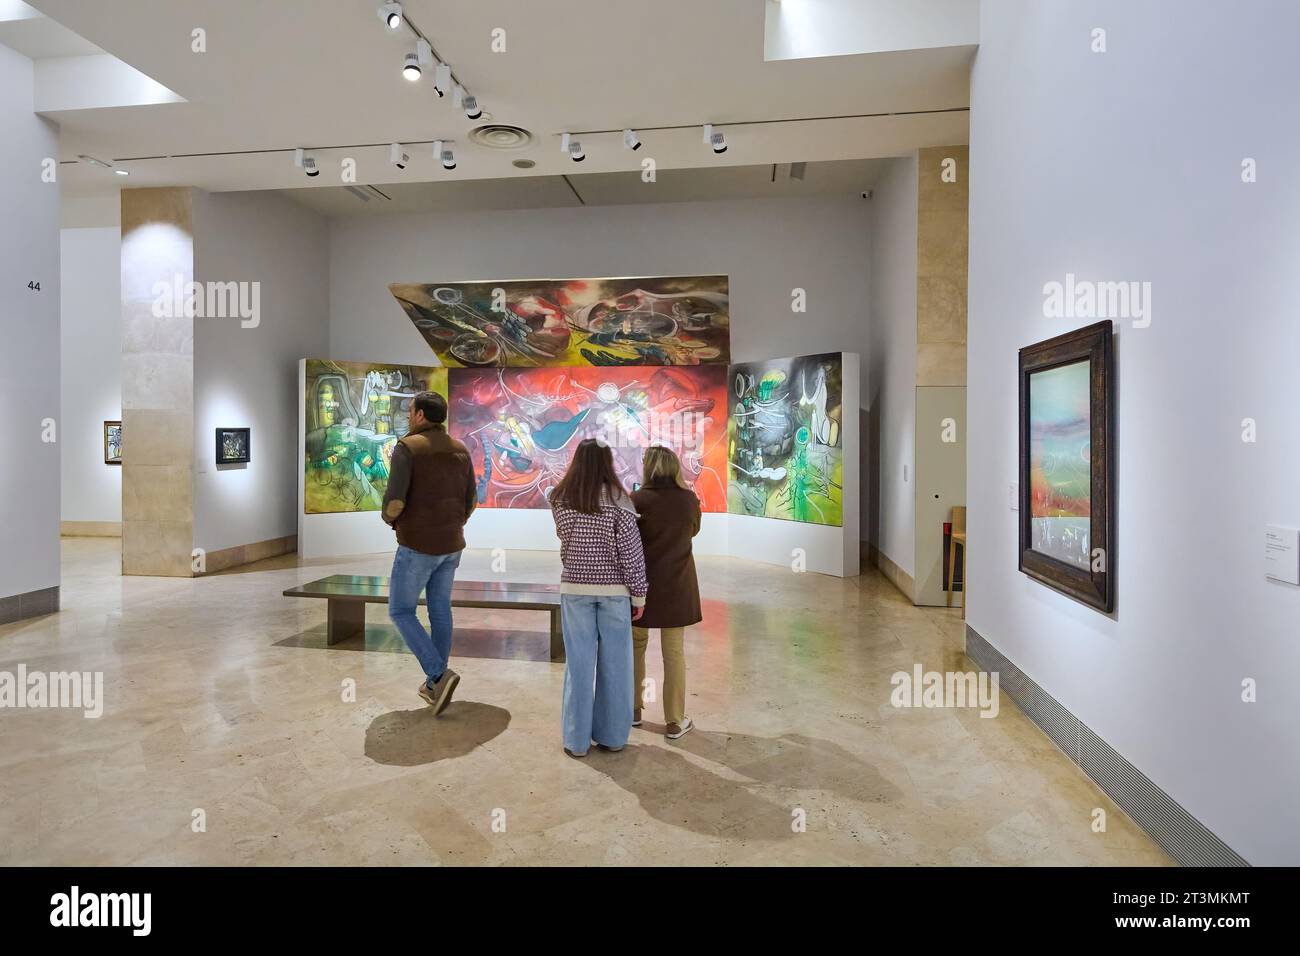 MADRID SPAIN - October 26, 2023: Group of people admiring an abstract painting in a brightly lit art gallery of the Thyssen Bornemisza national museum Stock Photo